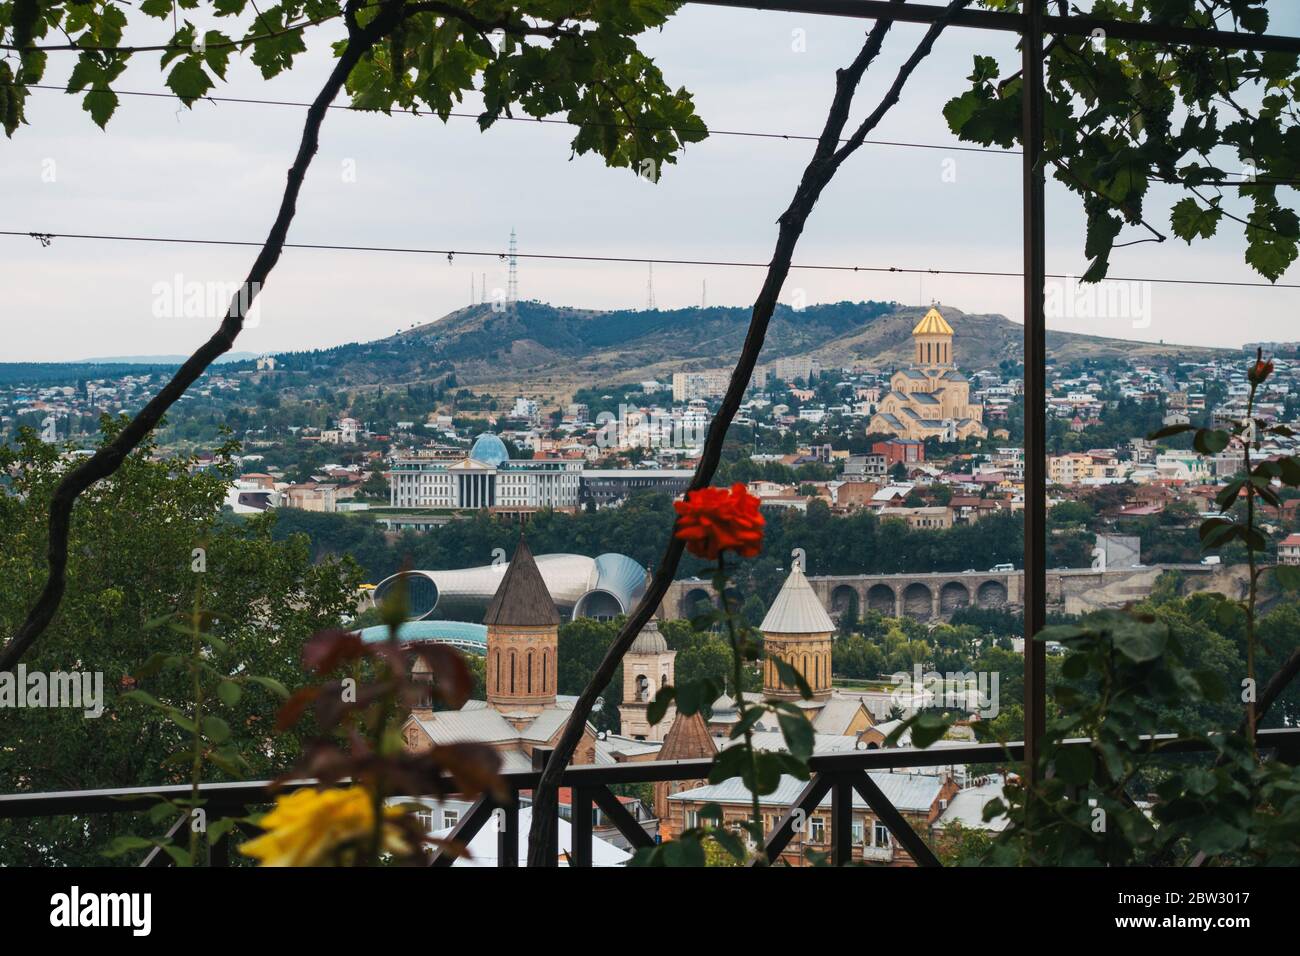 Looking out over the city of Tbilisi, Georgia from the Botanical Garden on the hilltop Stock Photo